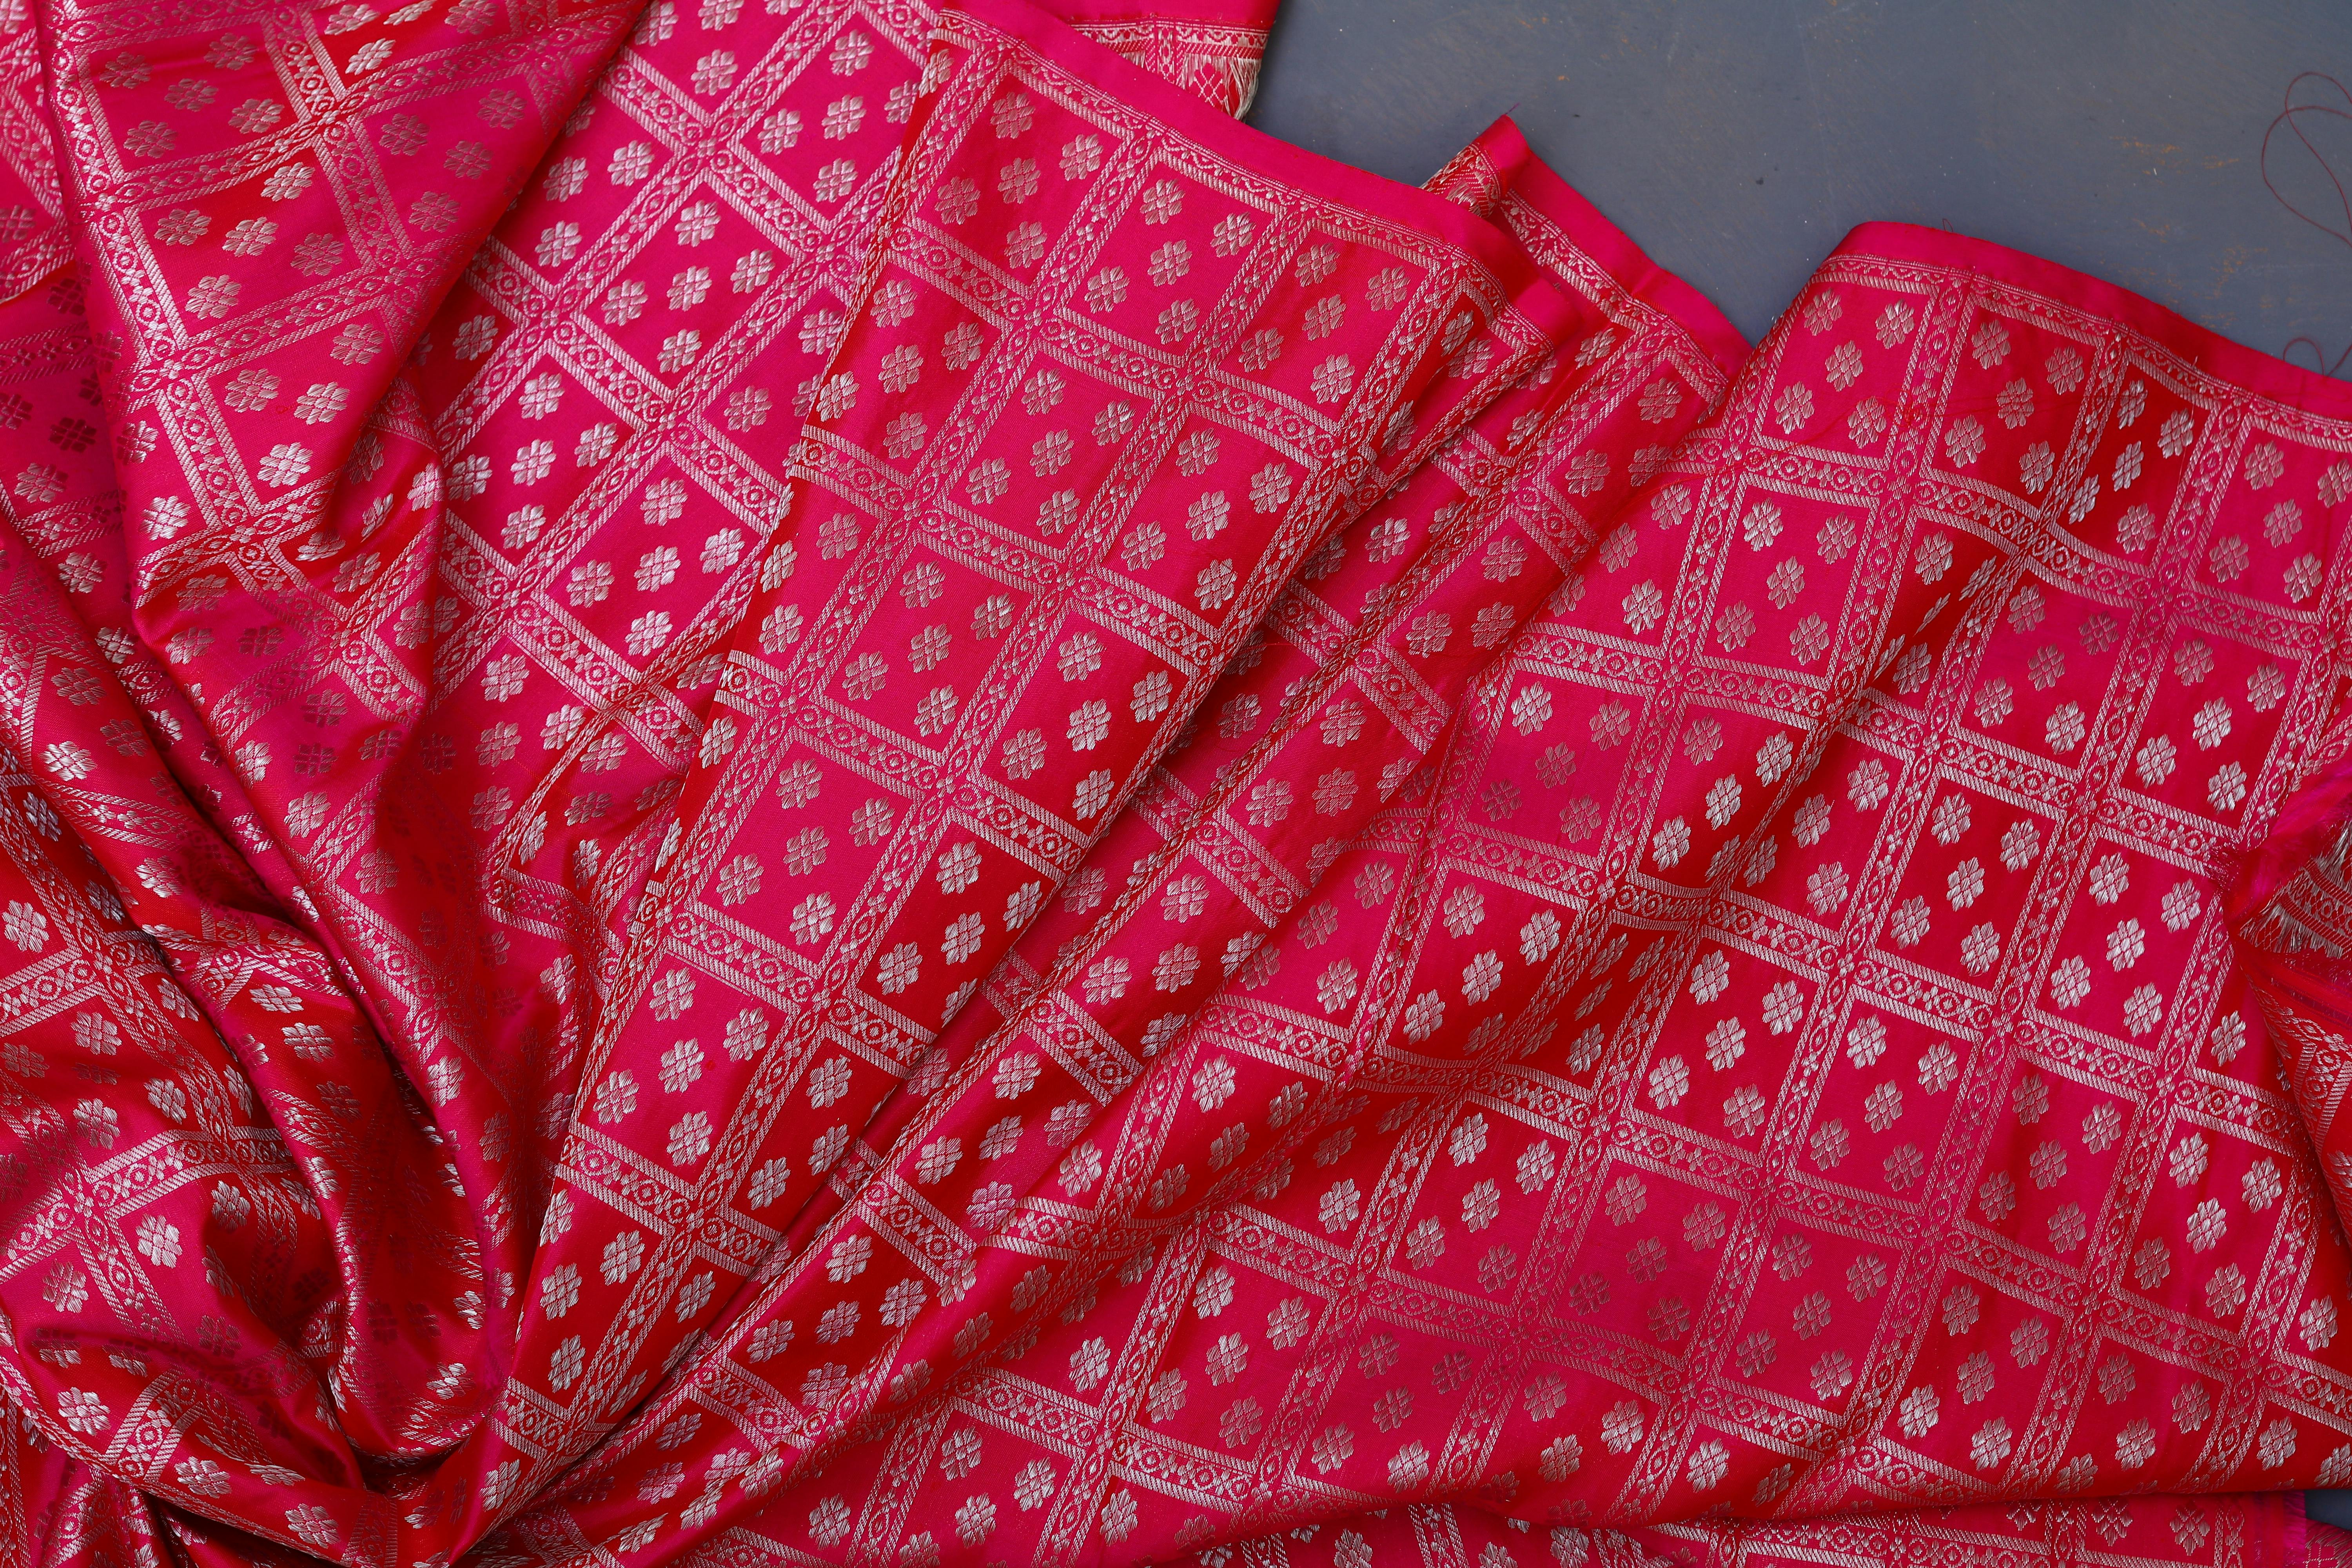 Free stock photo of online bollywood sarees, online celebrity sarees, online colorful sarees